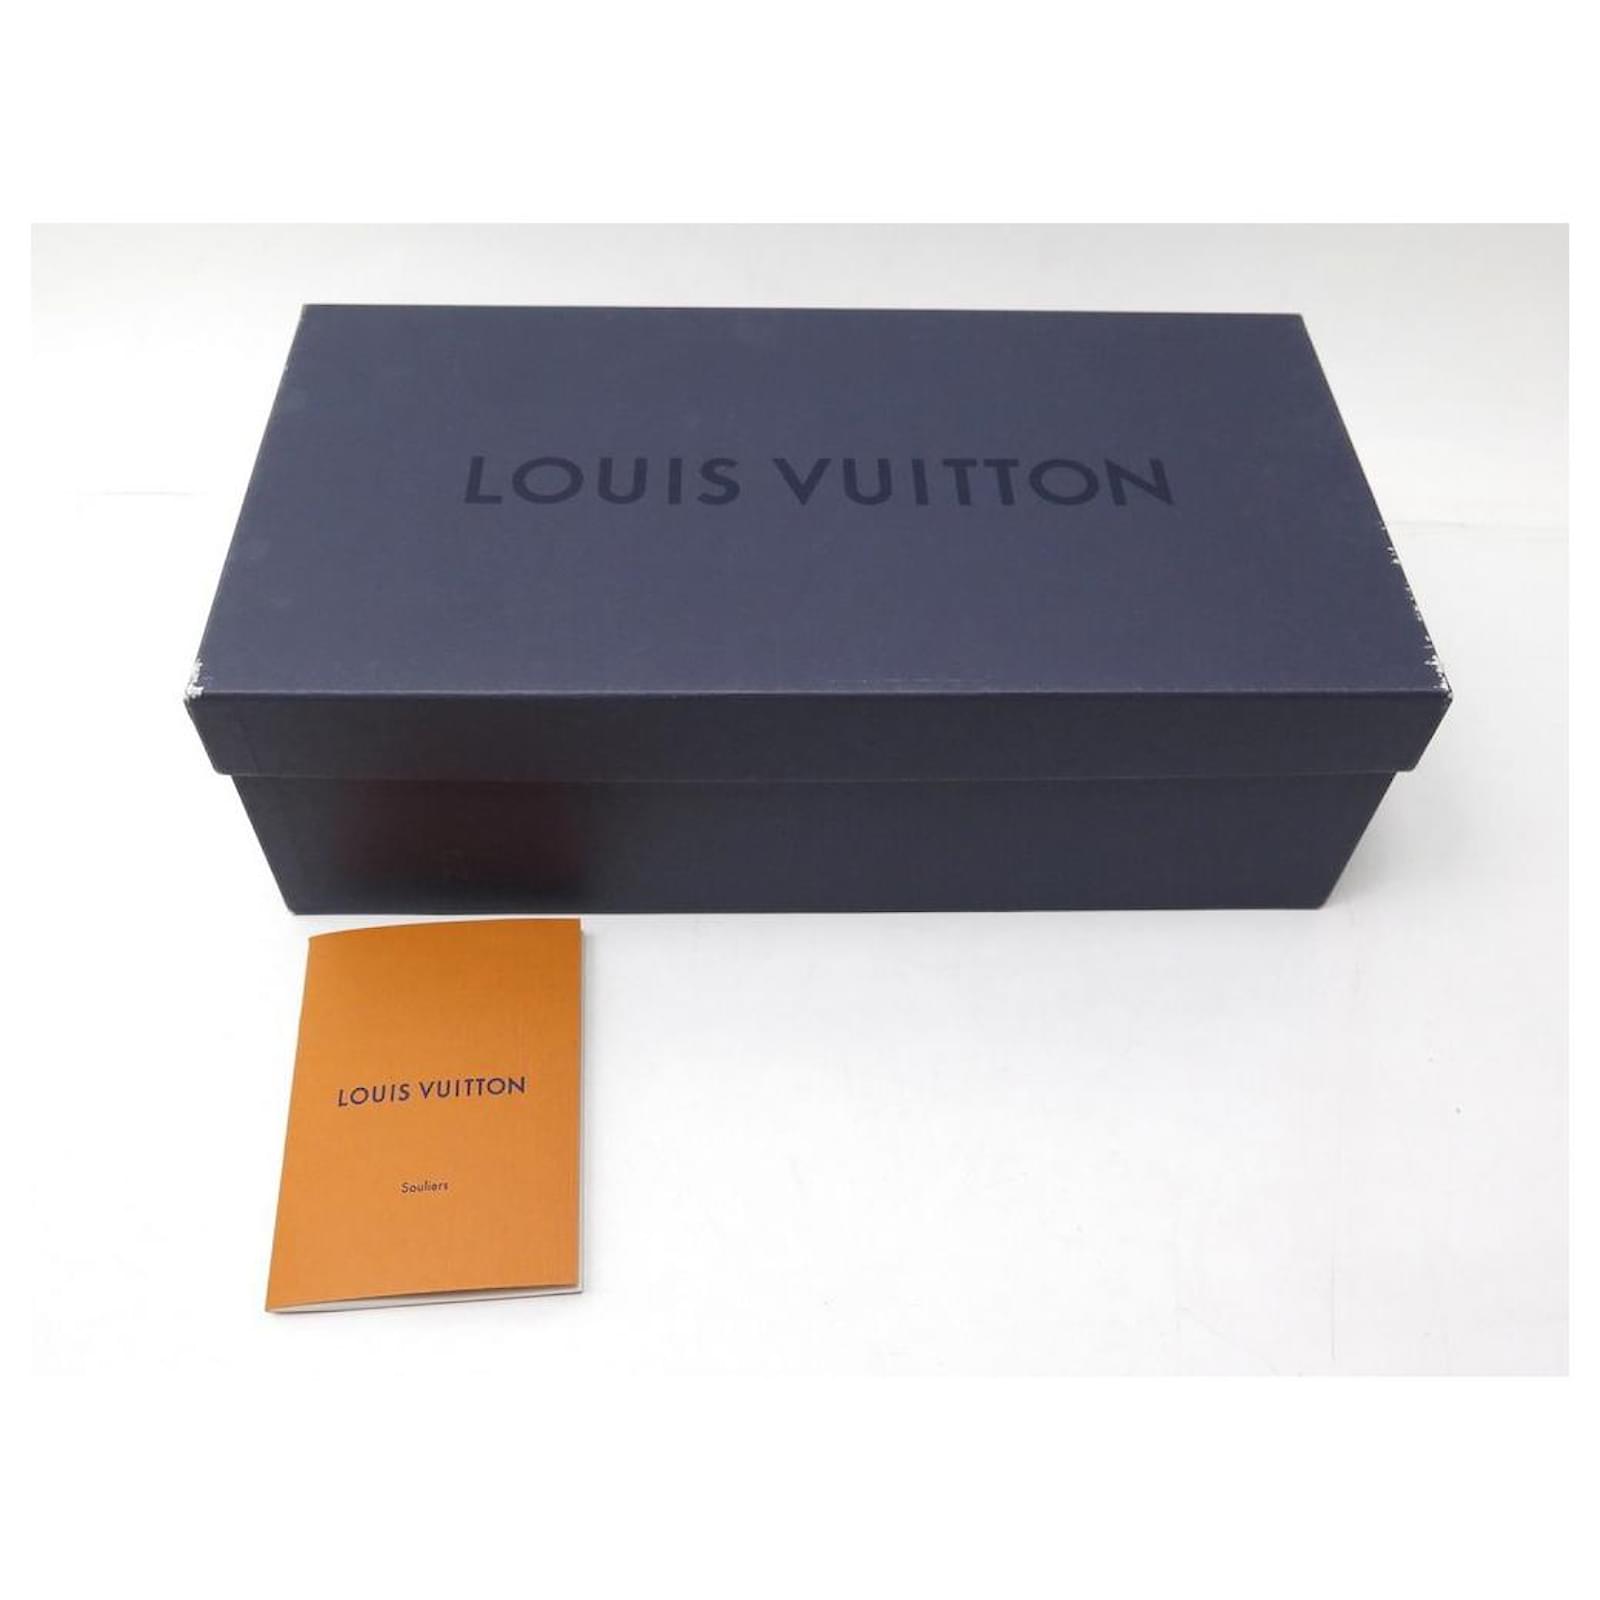 NEW LOUIS VUITTON OXFORD FLAT SHOES 40.5 PATENT LEATHER LOAFERS + BOX  ref.486471 - Joli Closet